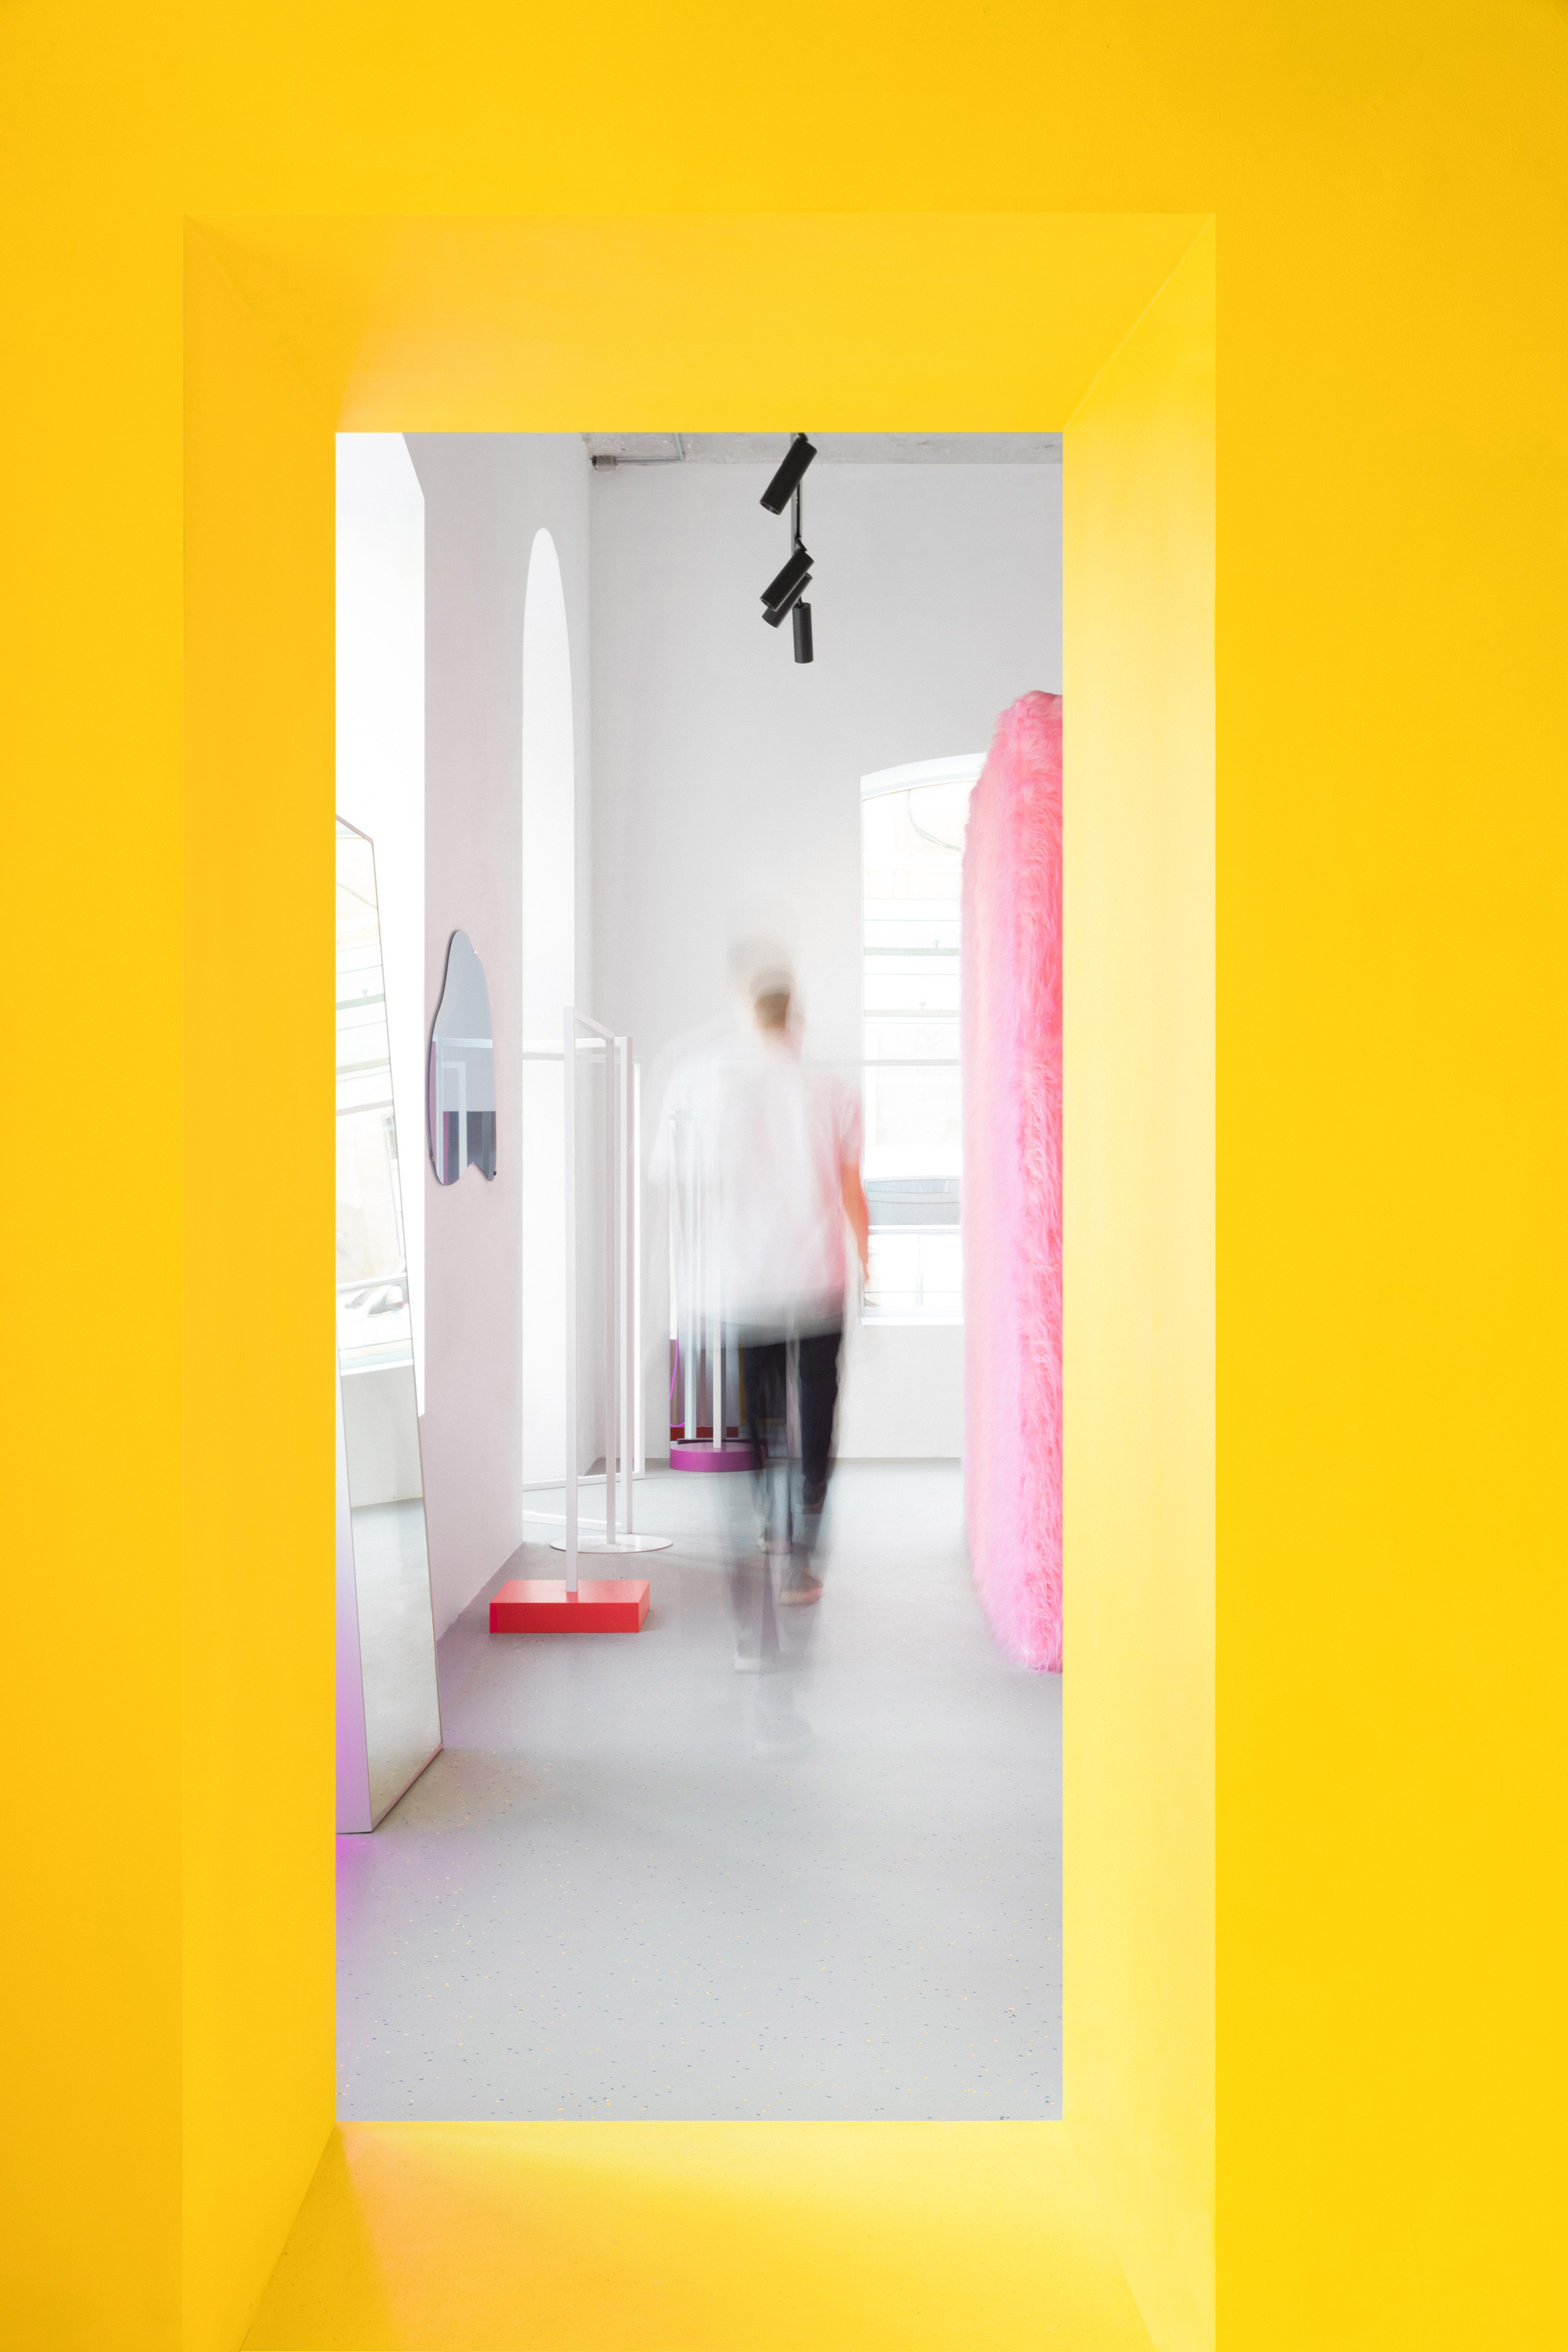 Pink furry walls and vibrant yellow surfaces brighten Russian